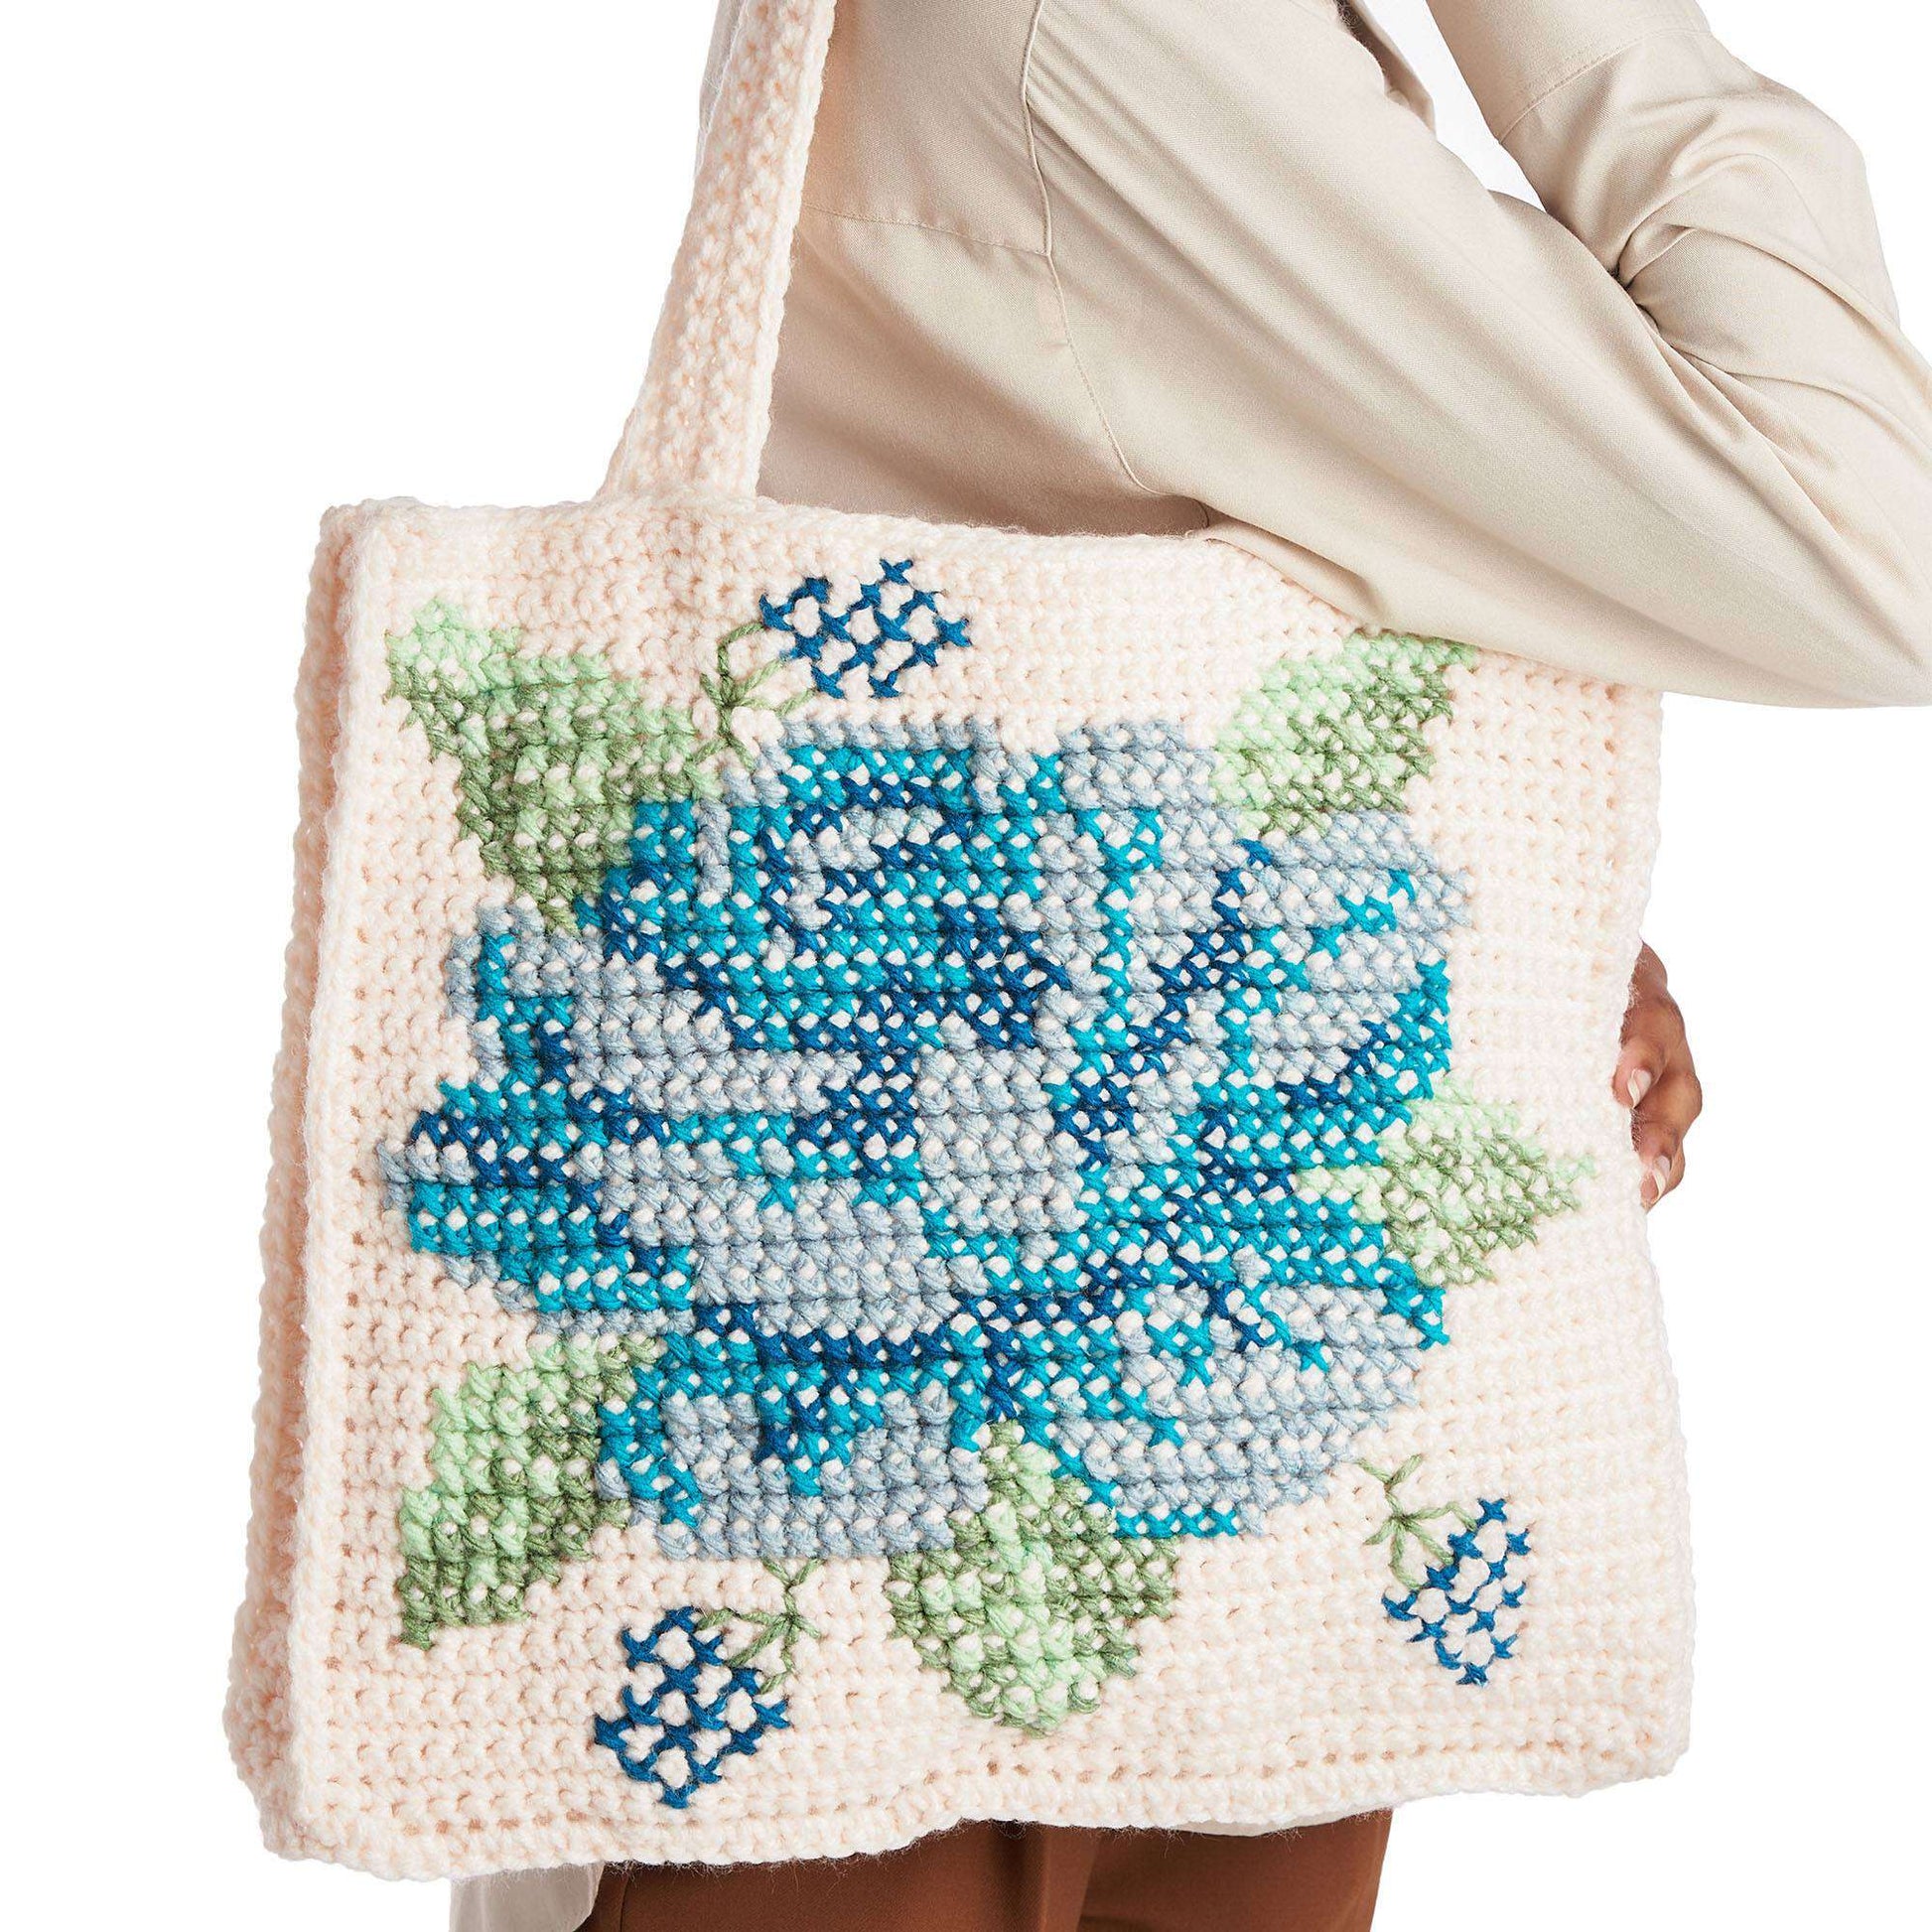 Two New Project Bags  Cross stitch sampler patterns, Cross stitch  supplies, Diy cross stitch